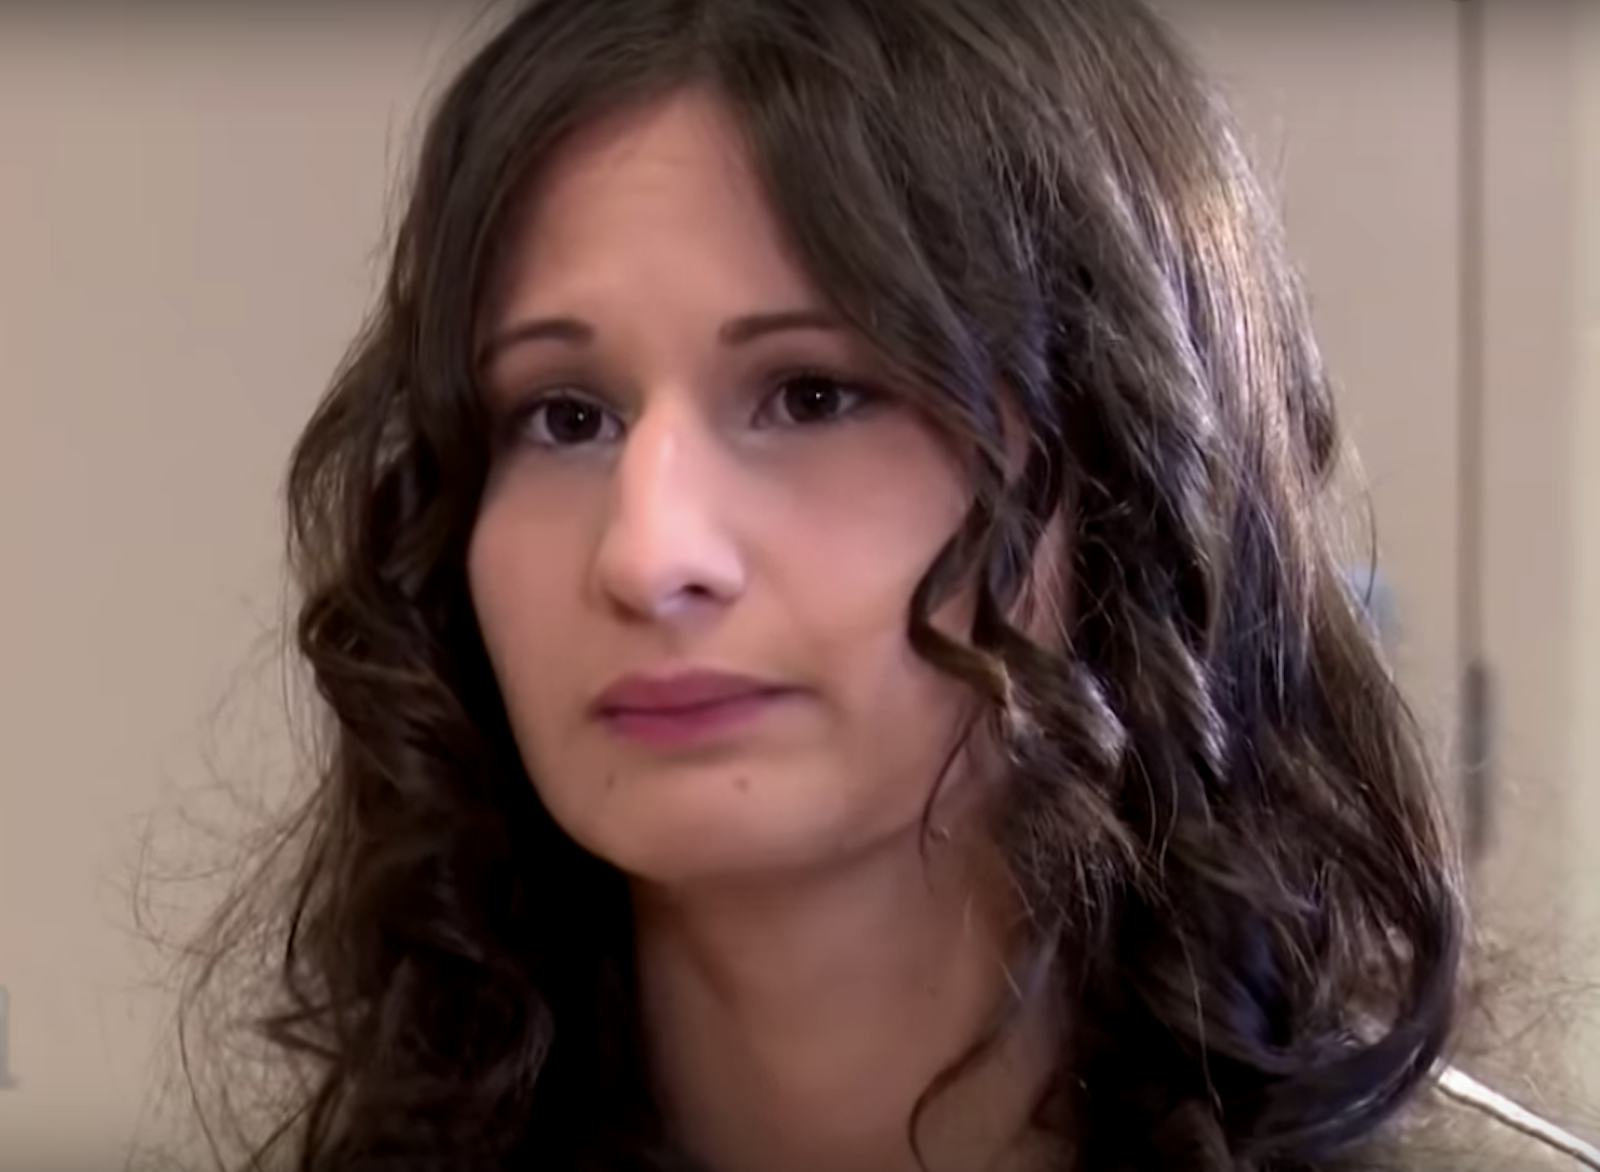 Gypsy Rose Blanchard Is Engaged To A Man She Met Through A Pen Pal Program According To Reports